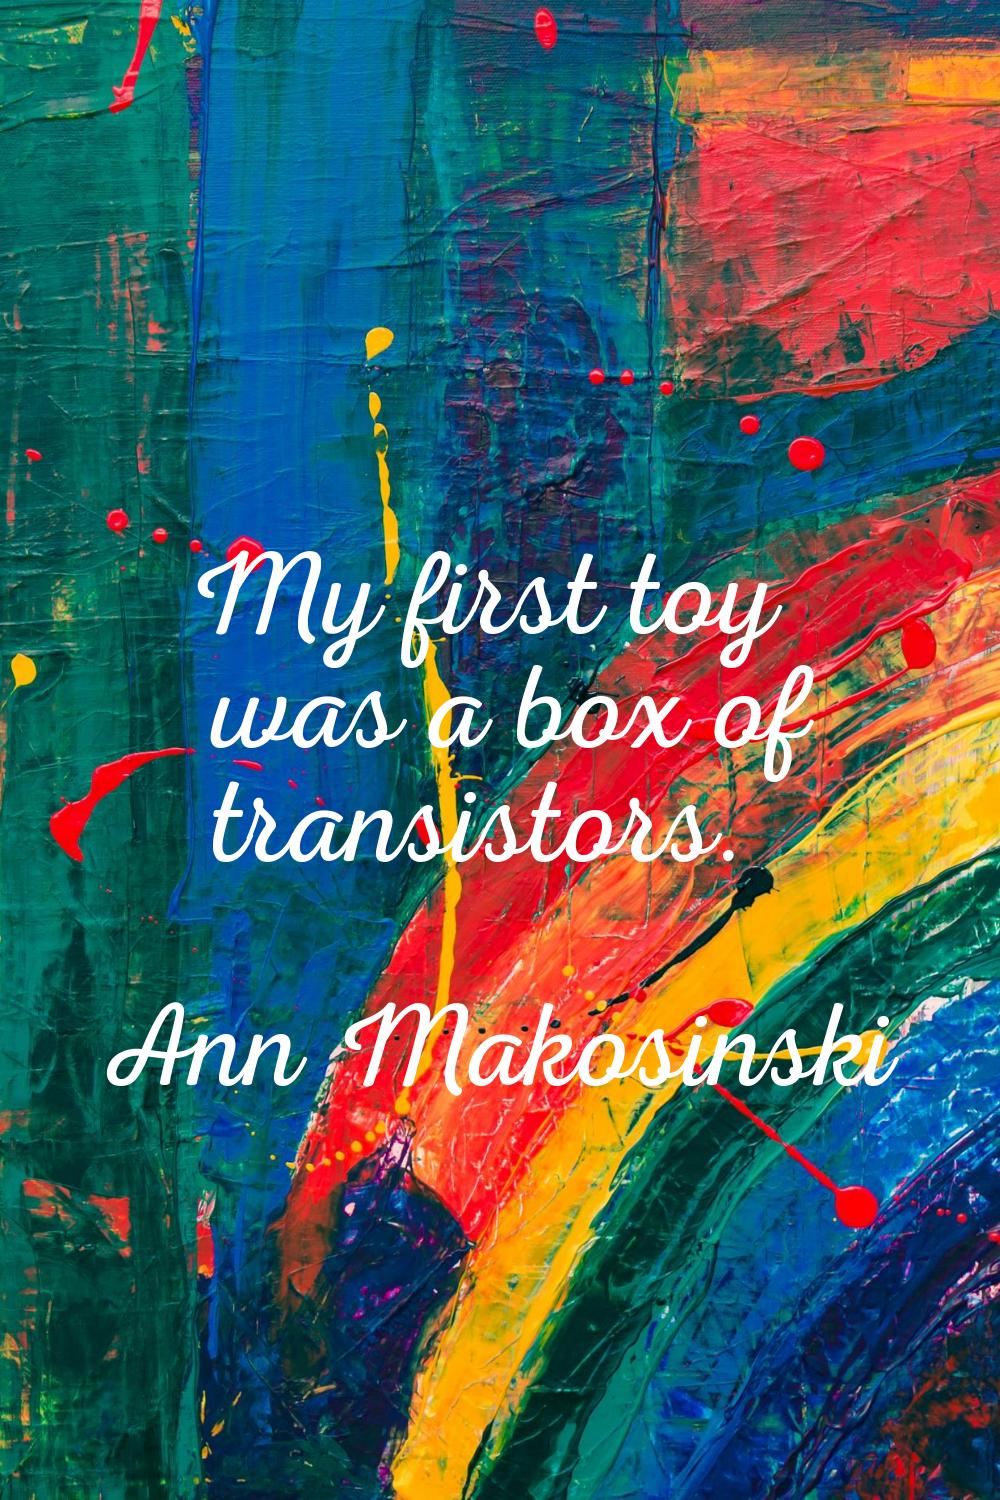 My first toy was a box of transistors.